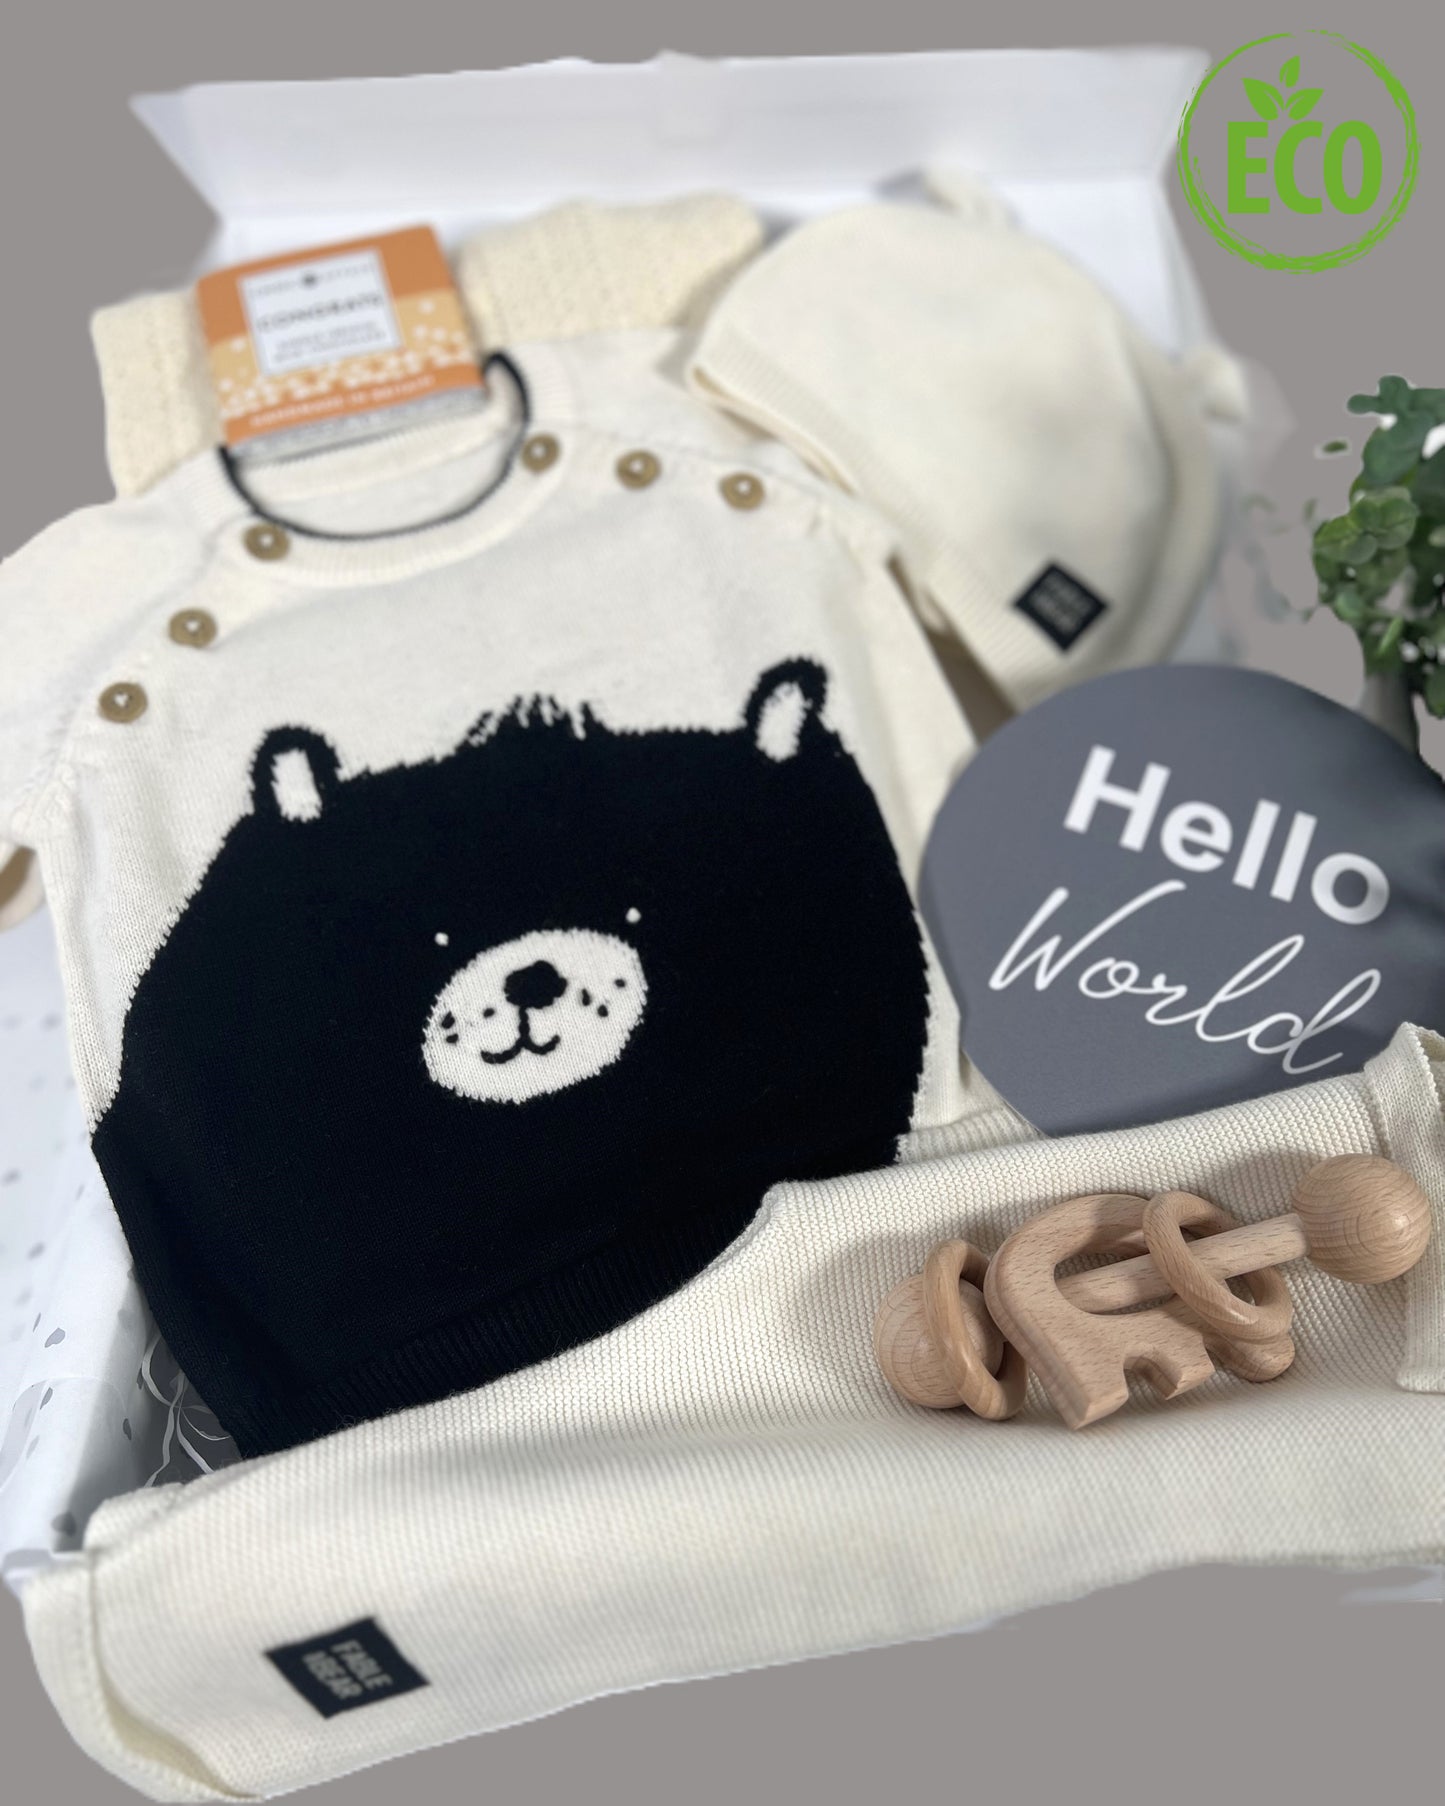 Stunning neutral new baby gift hamper containing organic cotton baby clothing set, wooded baby rttle, cotton cellular baby blanket and contained in a white magnetic baby keepsake box.